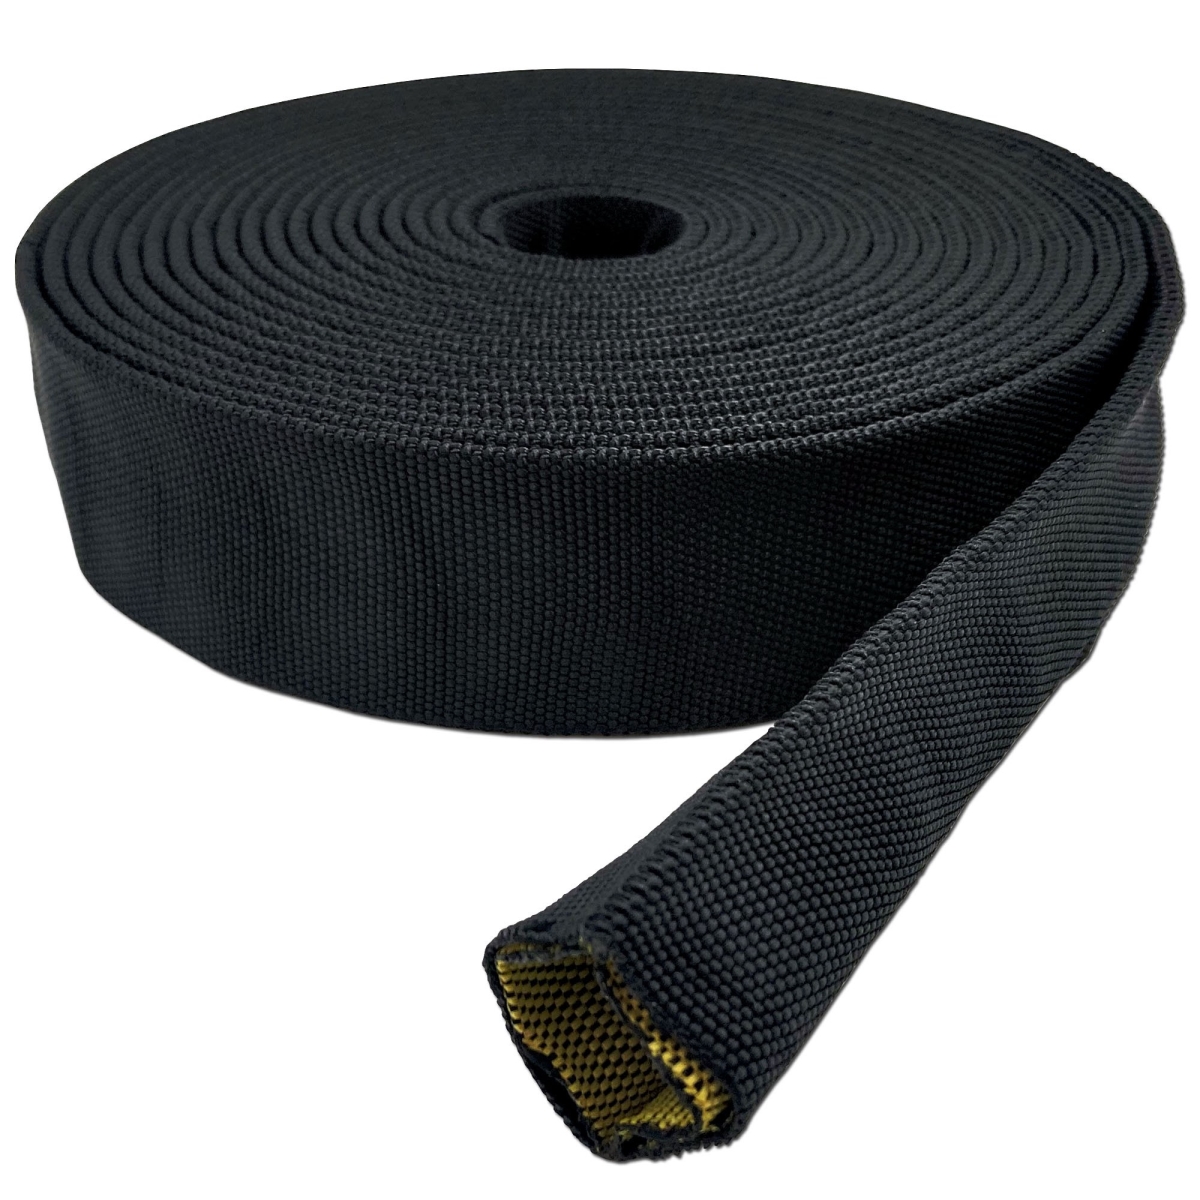 Picture of Electriduct BS-J-BURST-400-10-BK 4 in. x 10 ft. Burst Protection Multifilament Nylon Braided Sleeving - Black